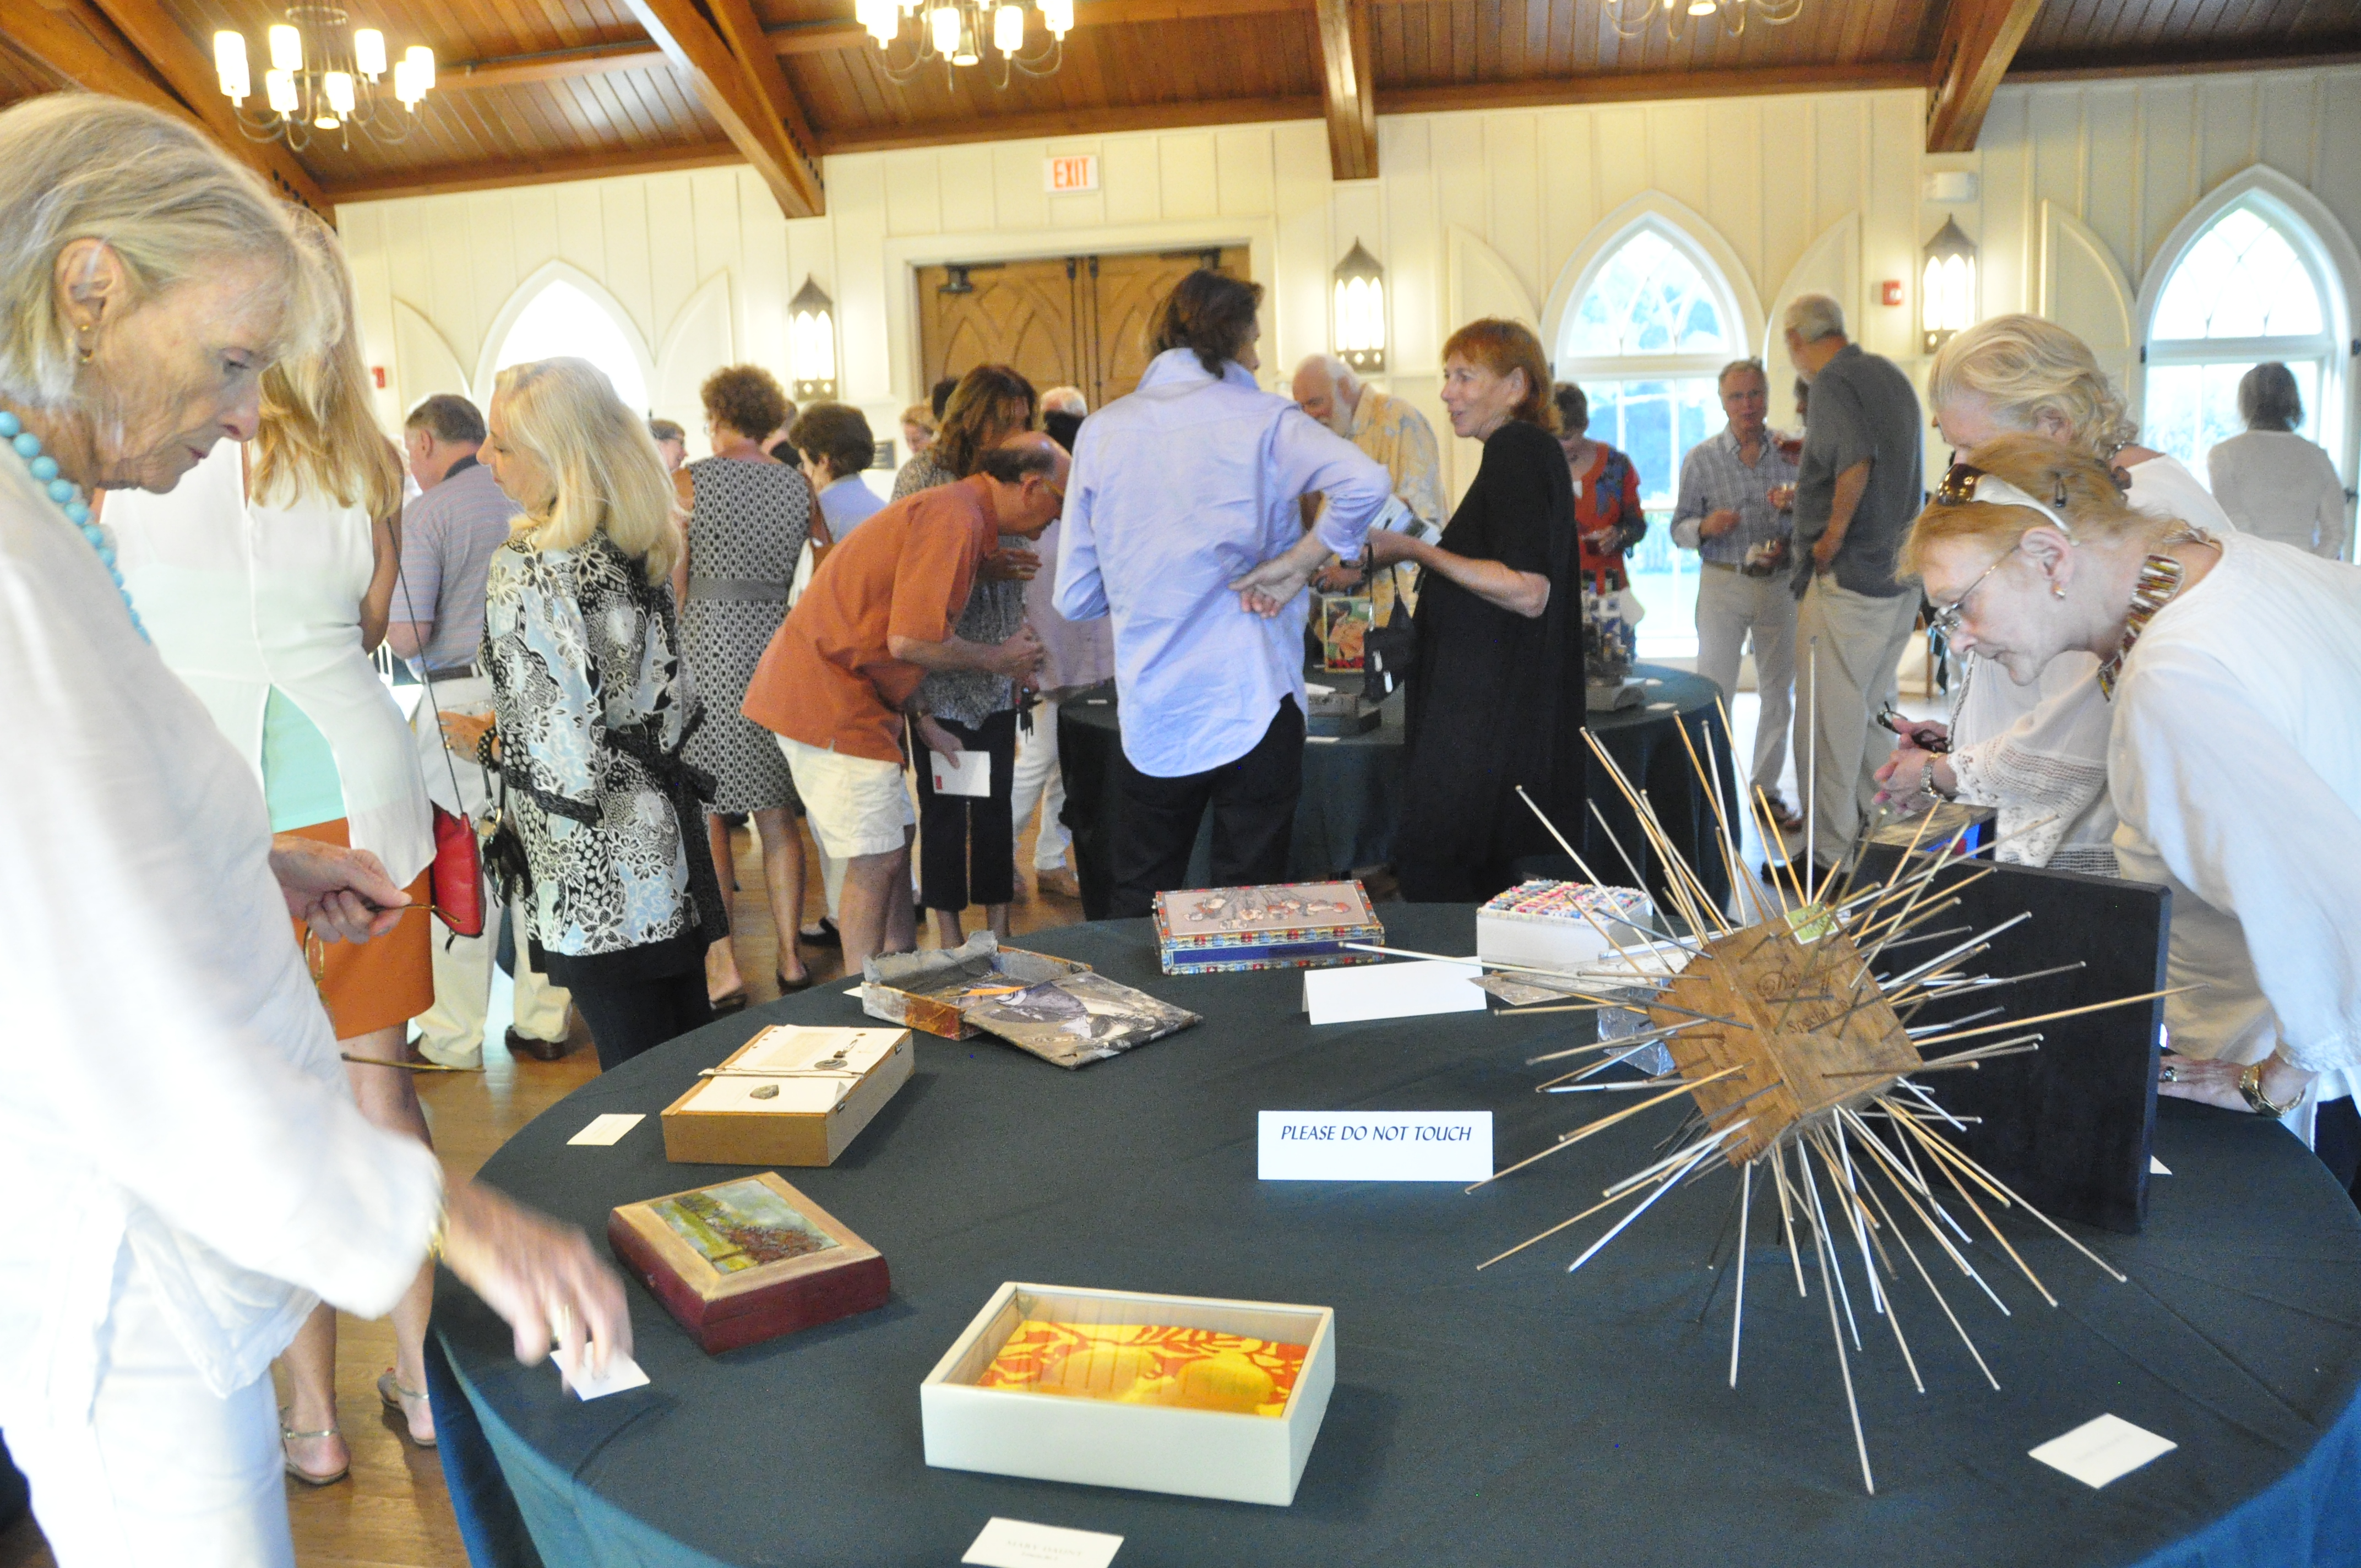 Scenes from the Box Art Auction preview at St. Luke's Church in East Hampton. MICHELLE TRAURING